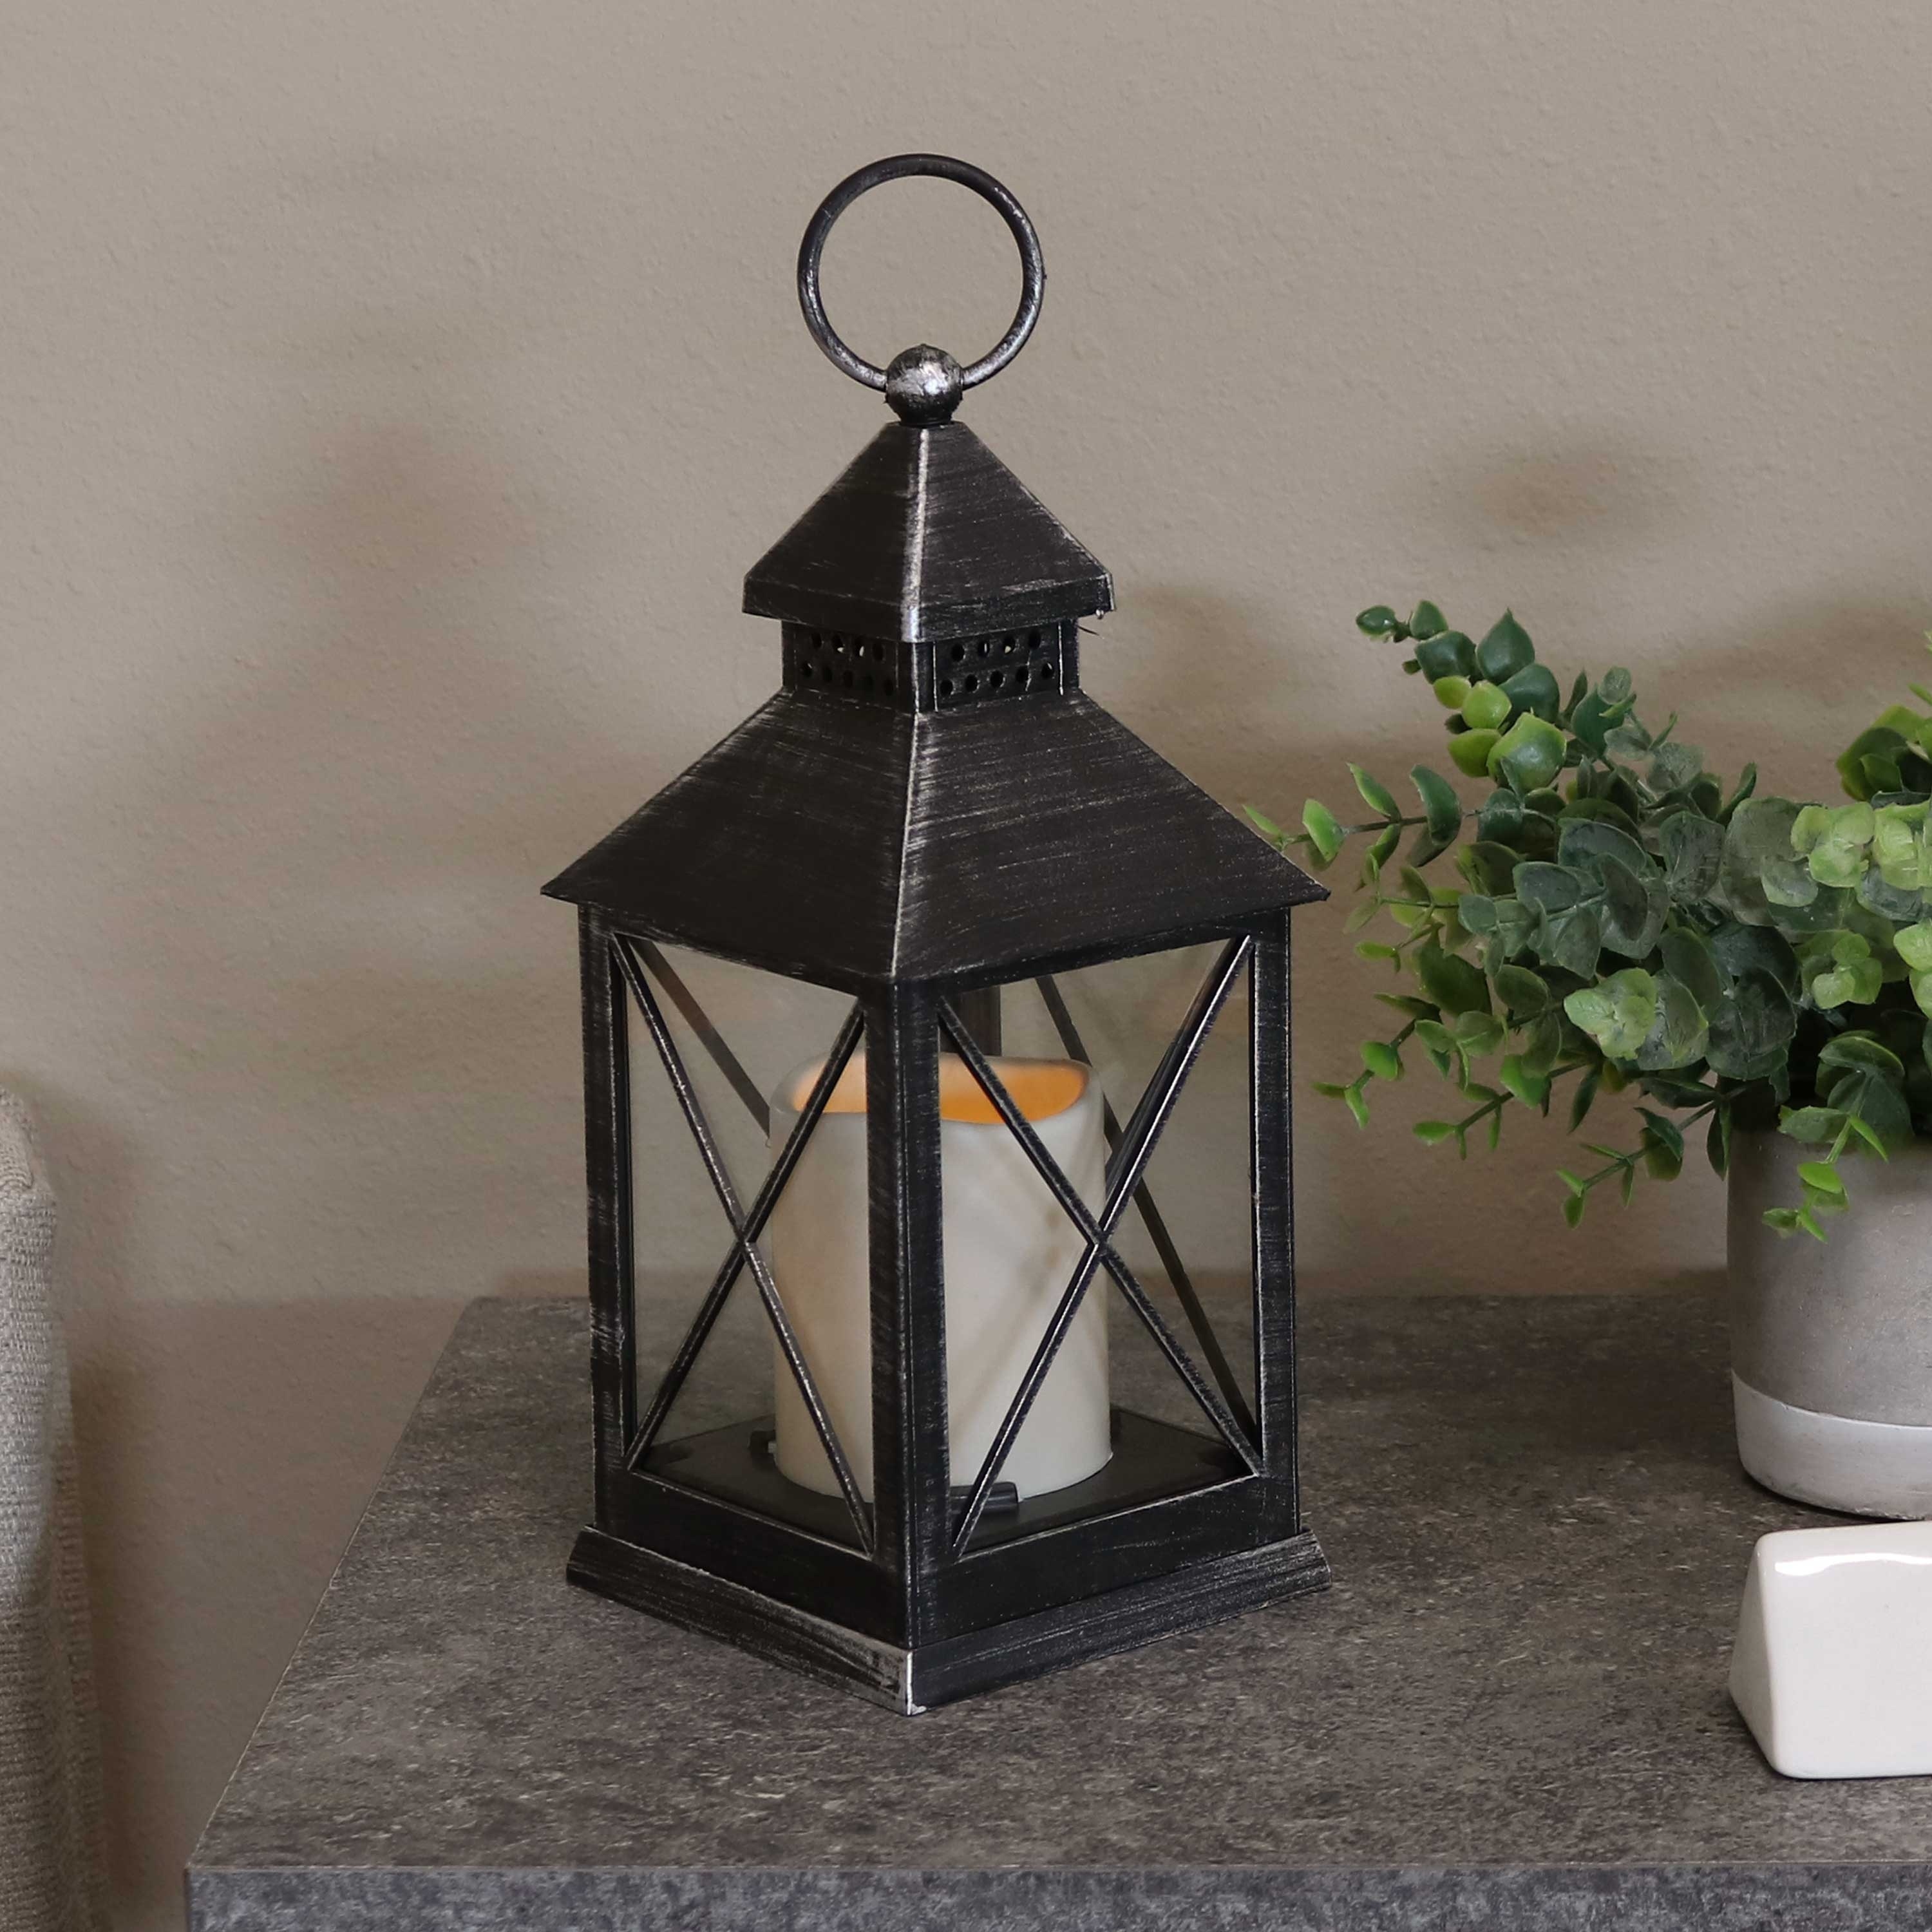 Sunjoy 20 in. Candle Lantern with LED Battery Powered, Waterproof